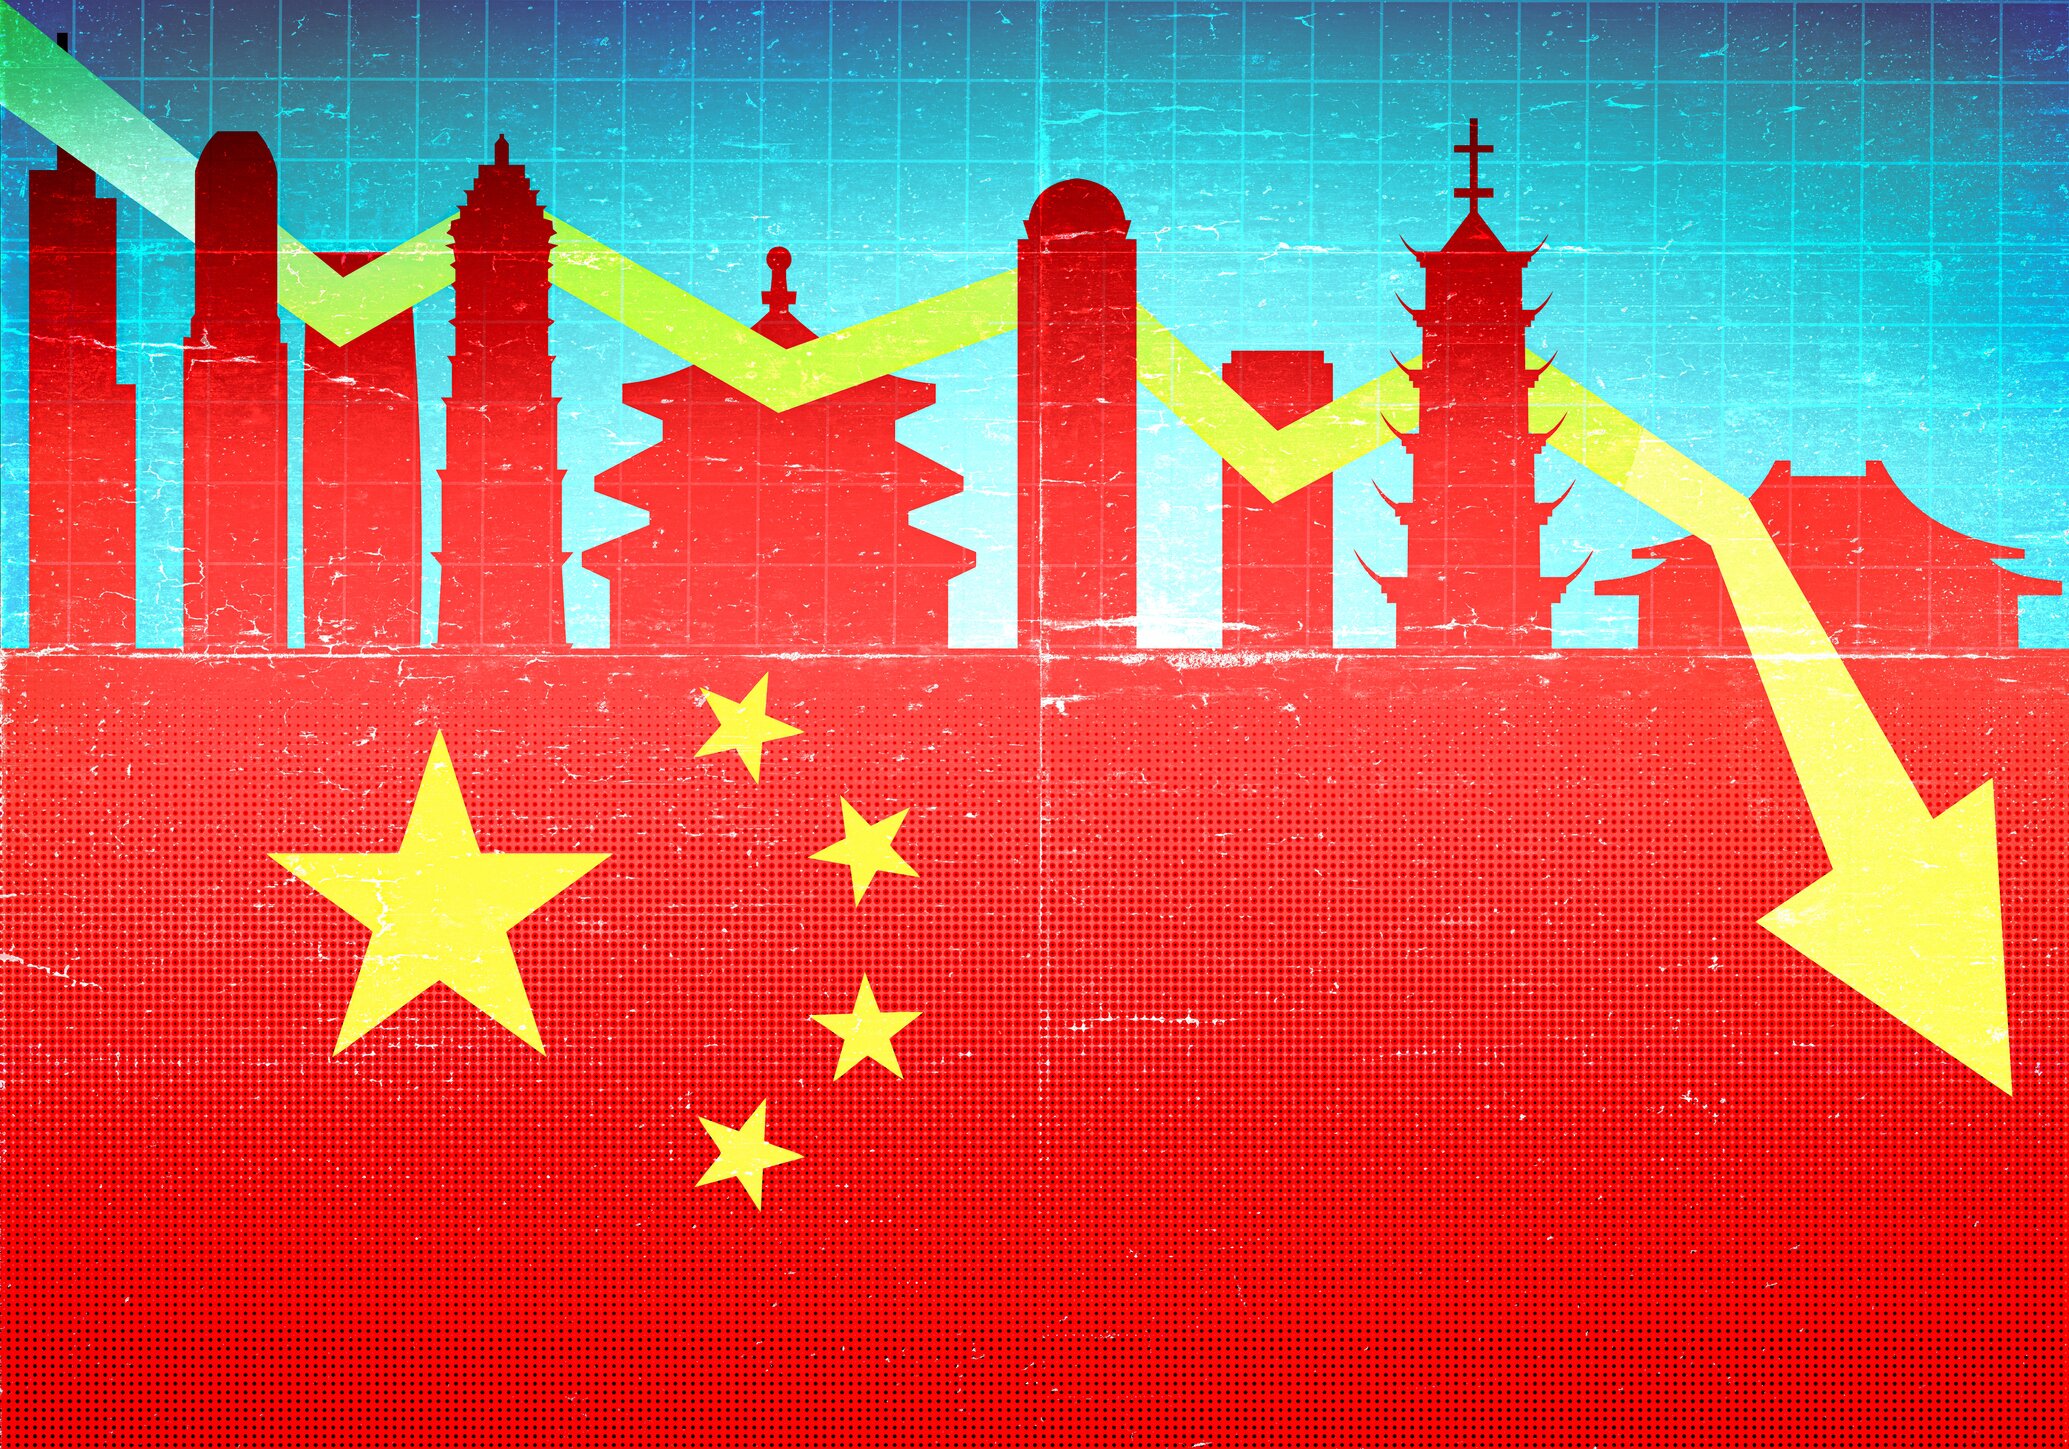 Why Chinese stocks have lost $6 trillion in 3 years: everything you need to  know